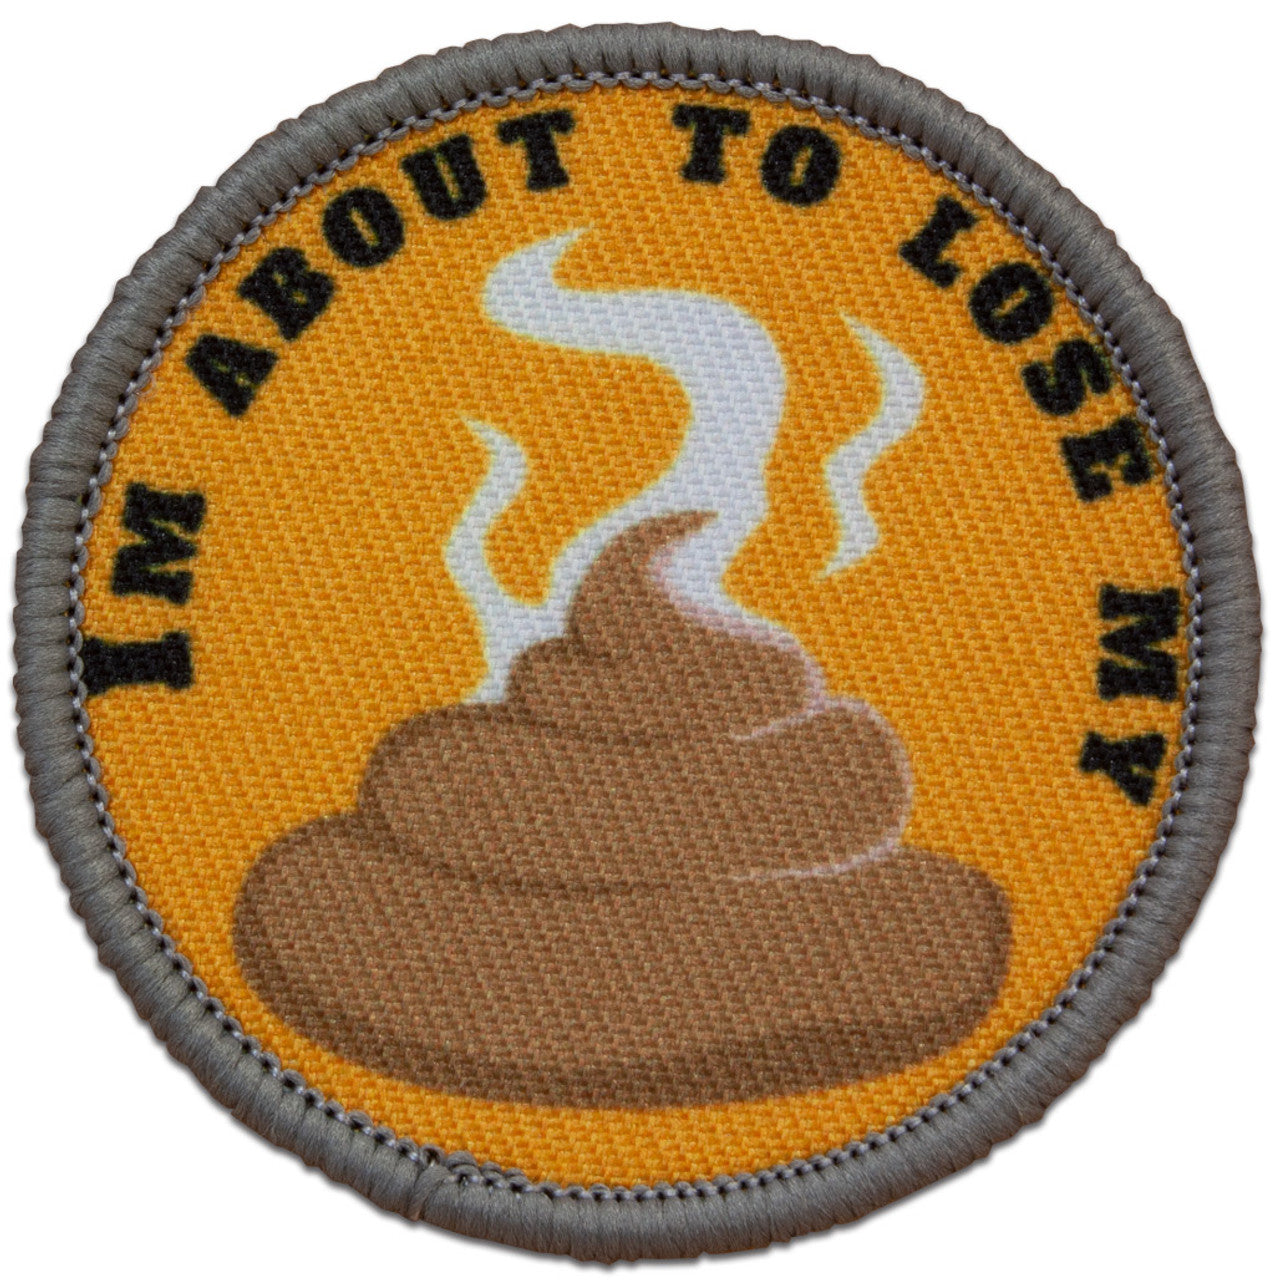 "I'M ABOUT TO LOSE MY SHIT" MORALE PATCH